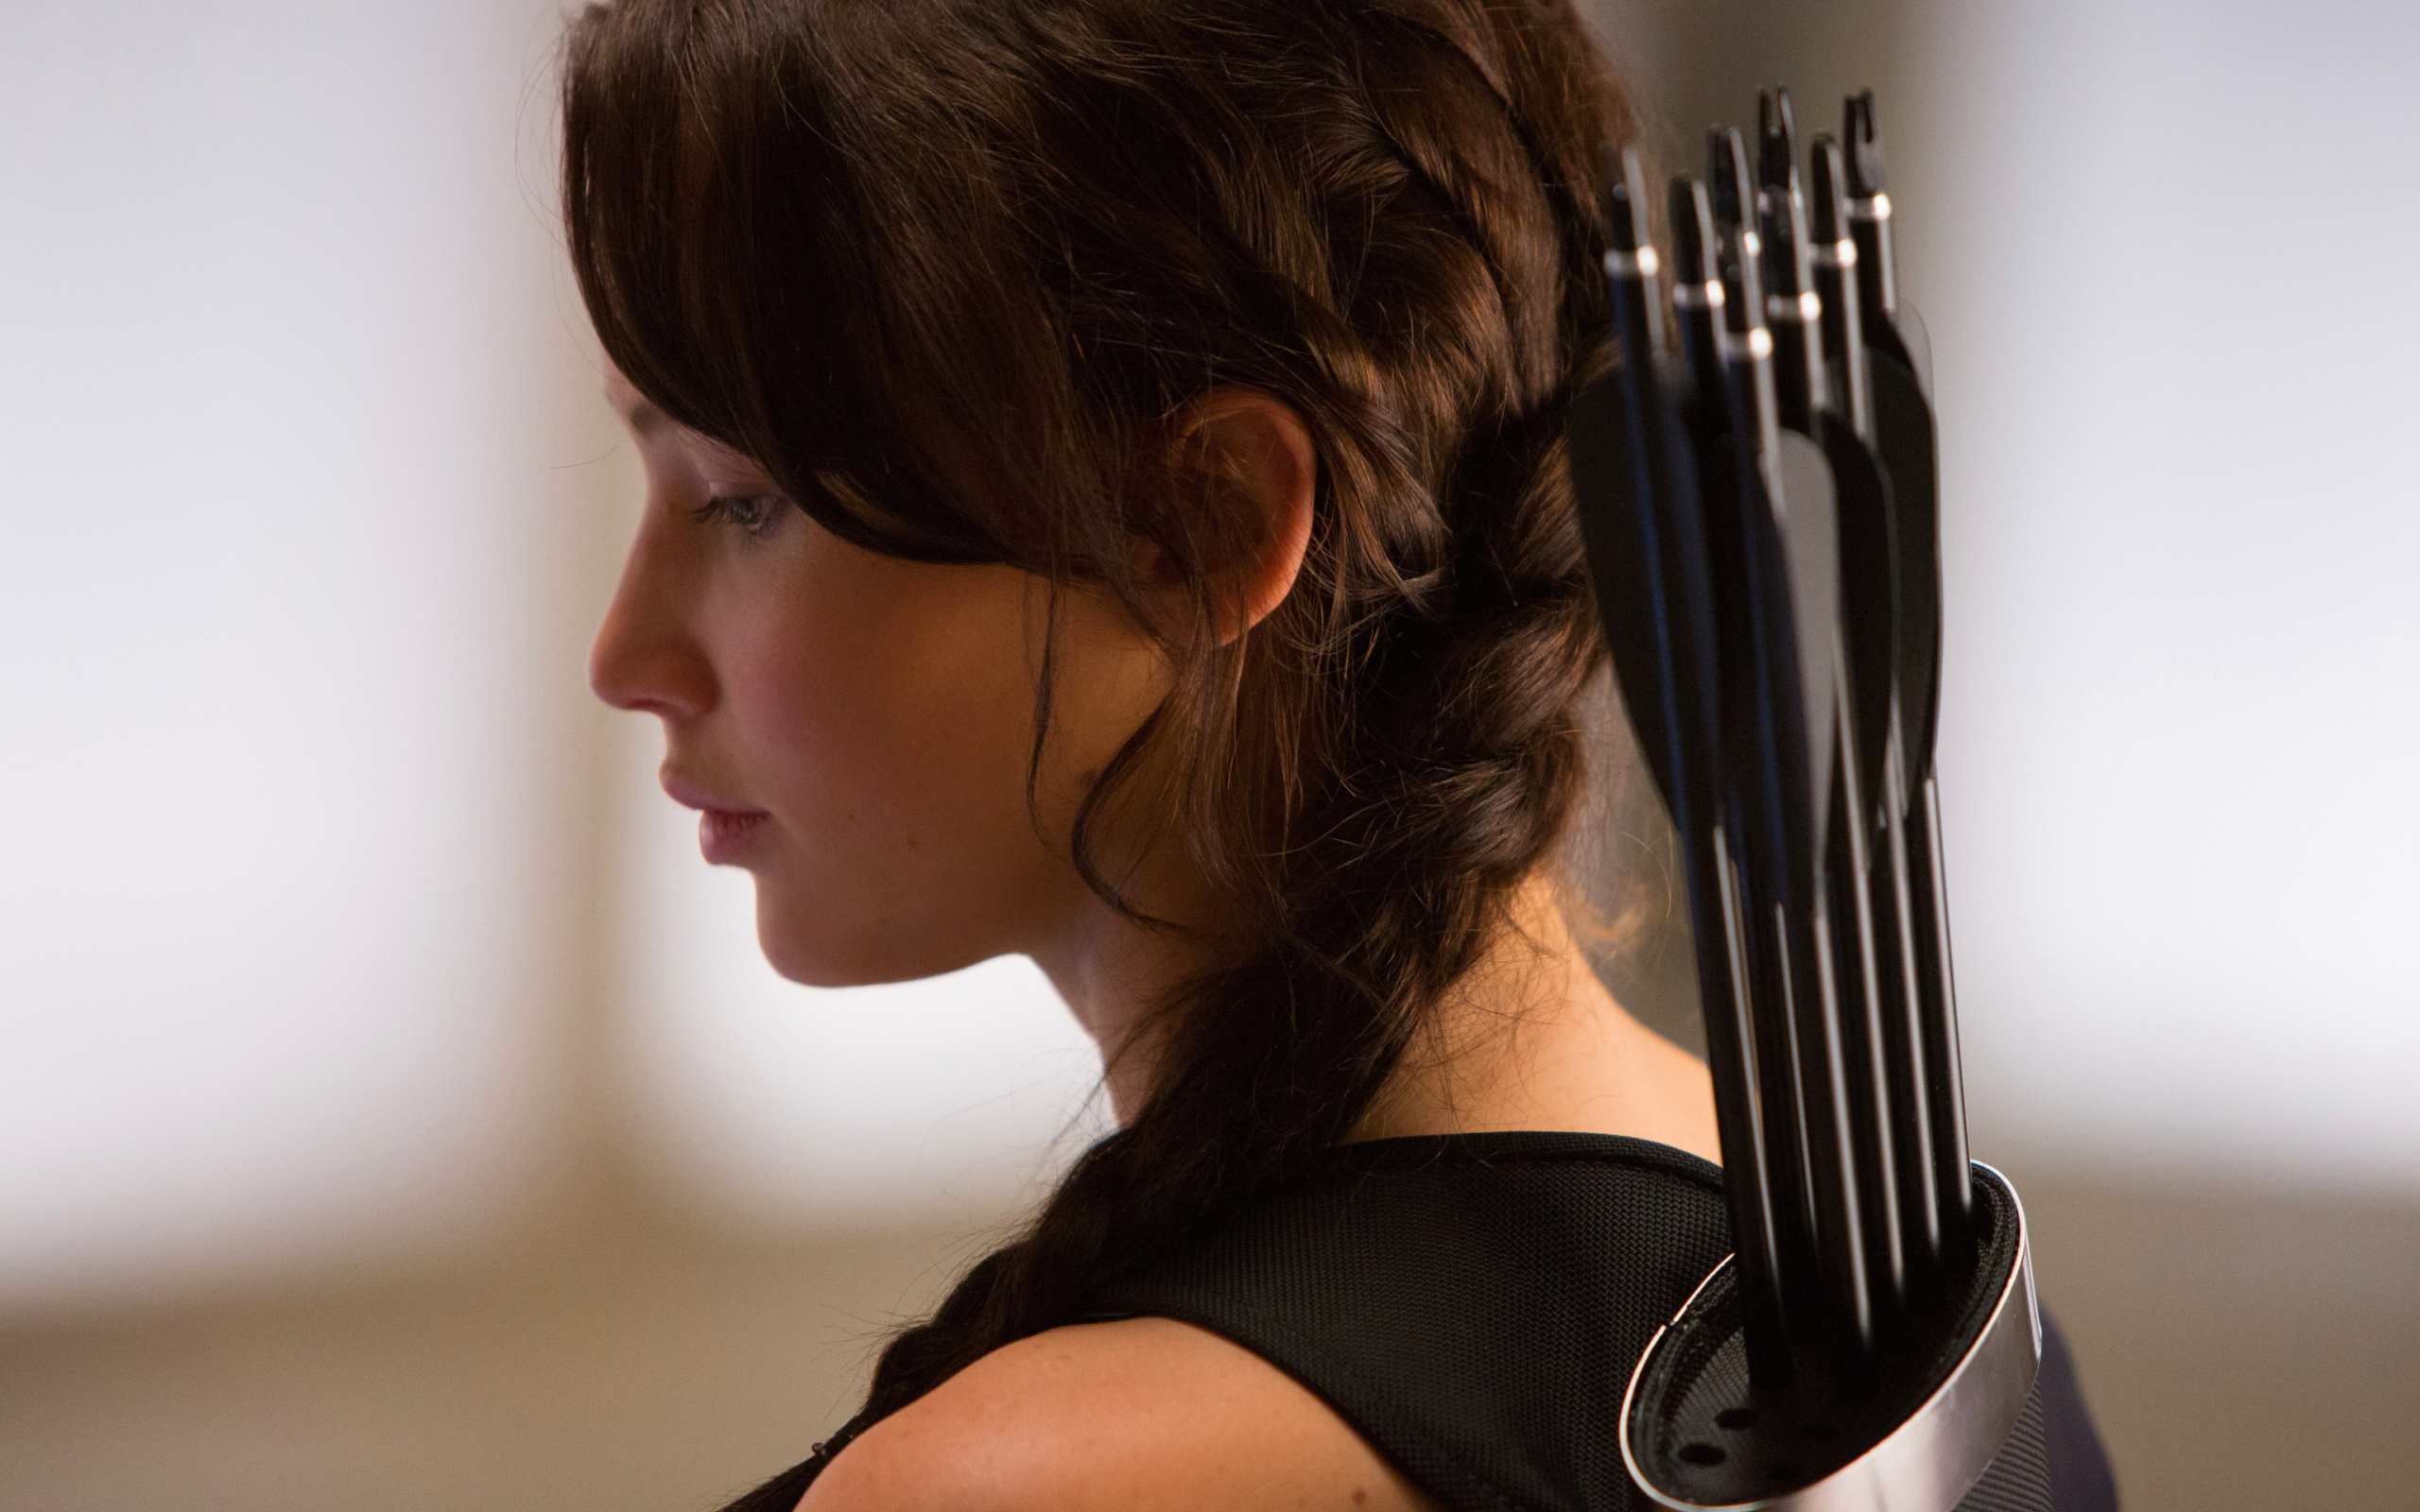 Jennifer lawrence in The Hunger Games Catching Fire wallpaper 2560x1600